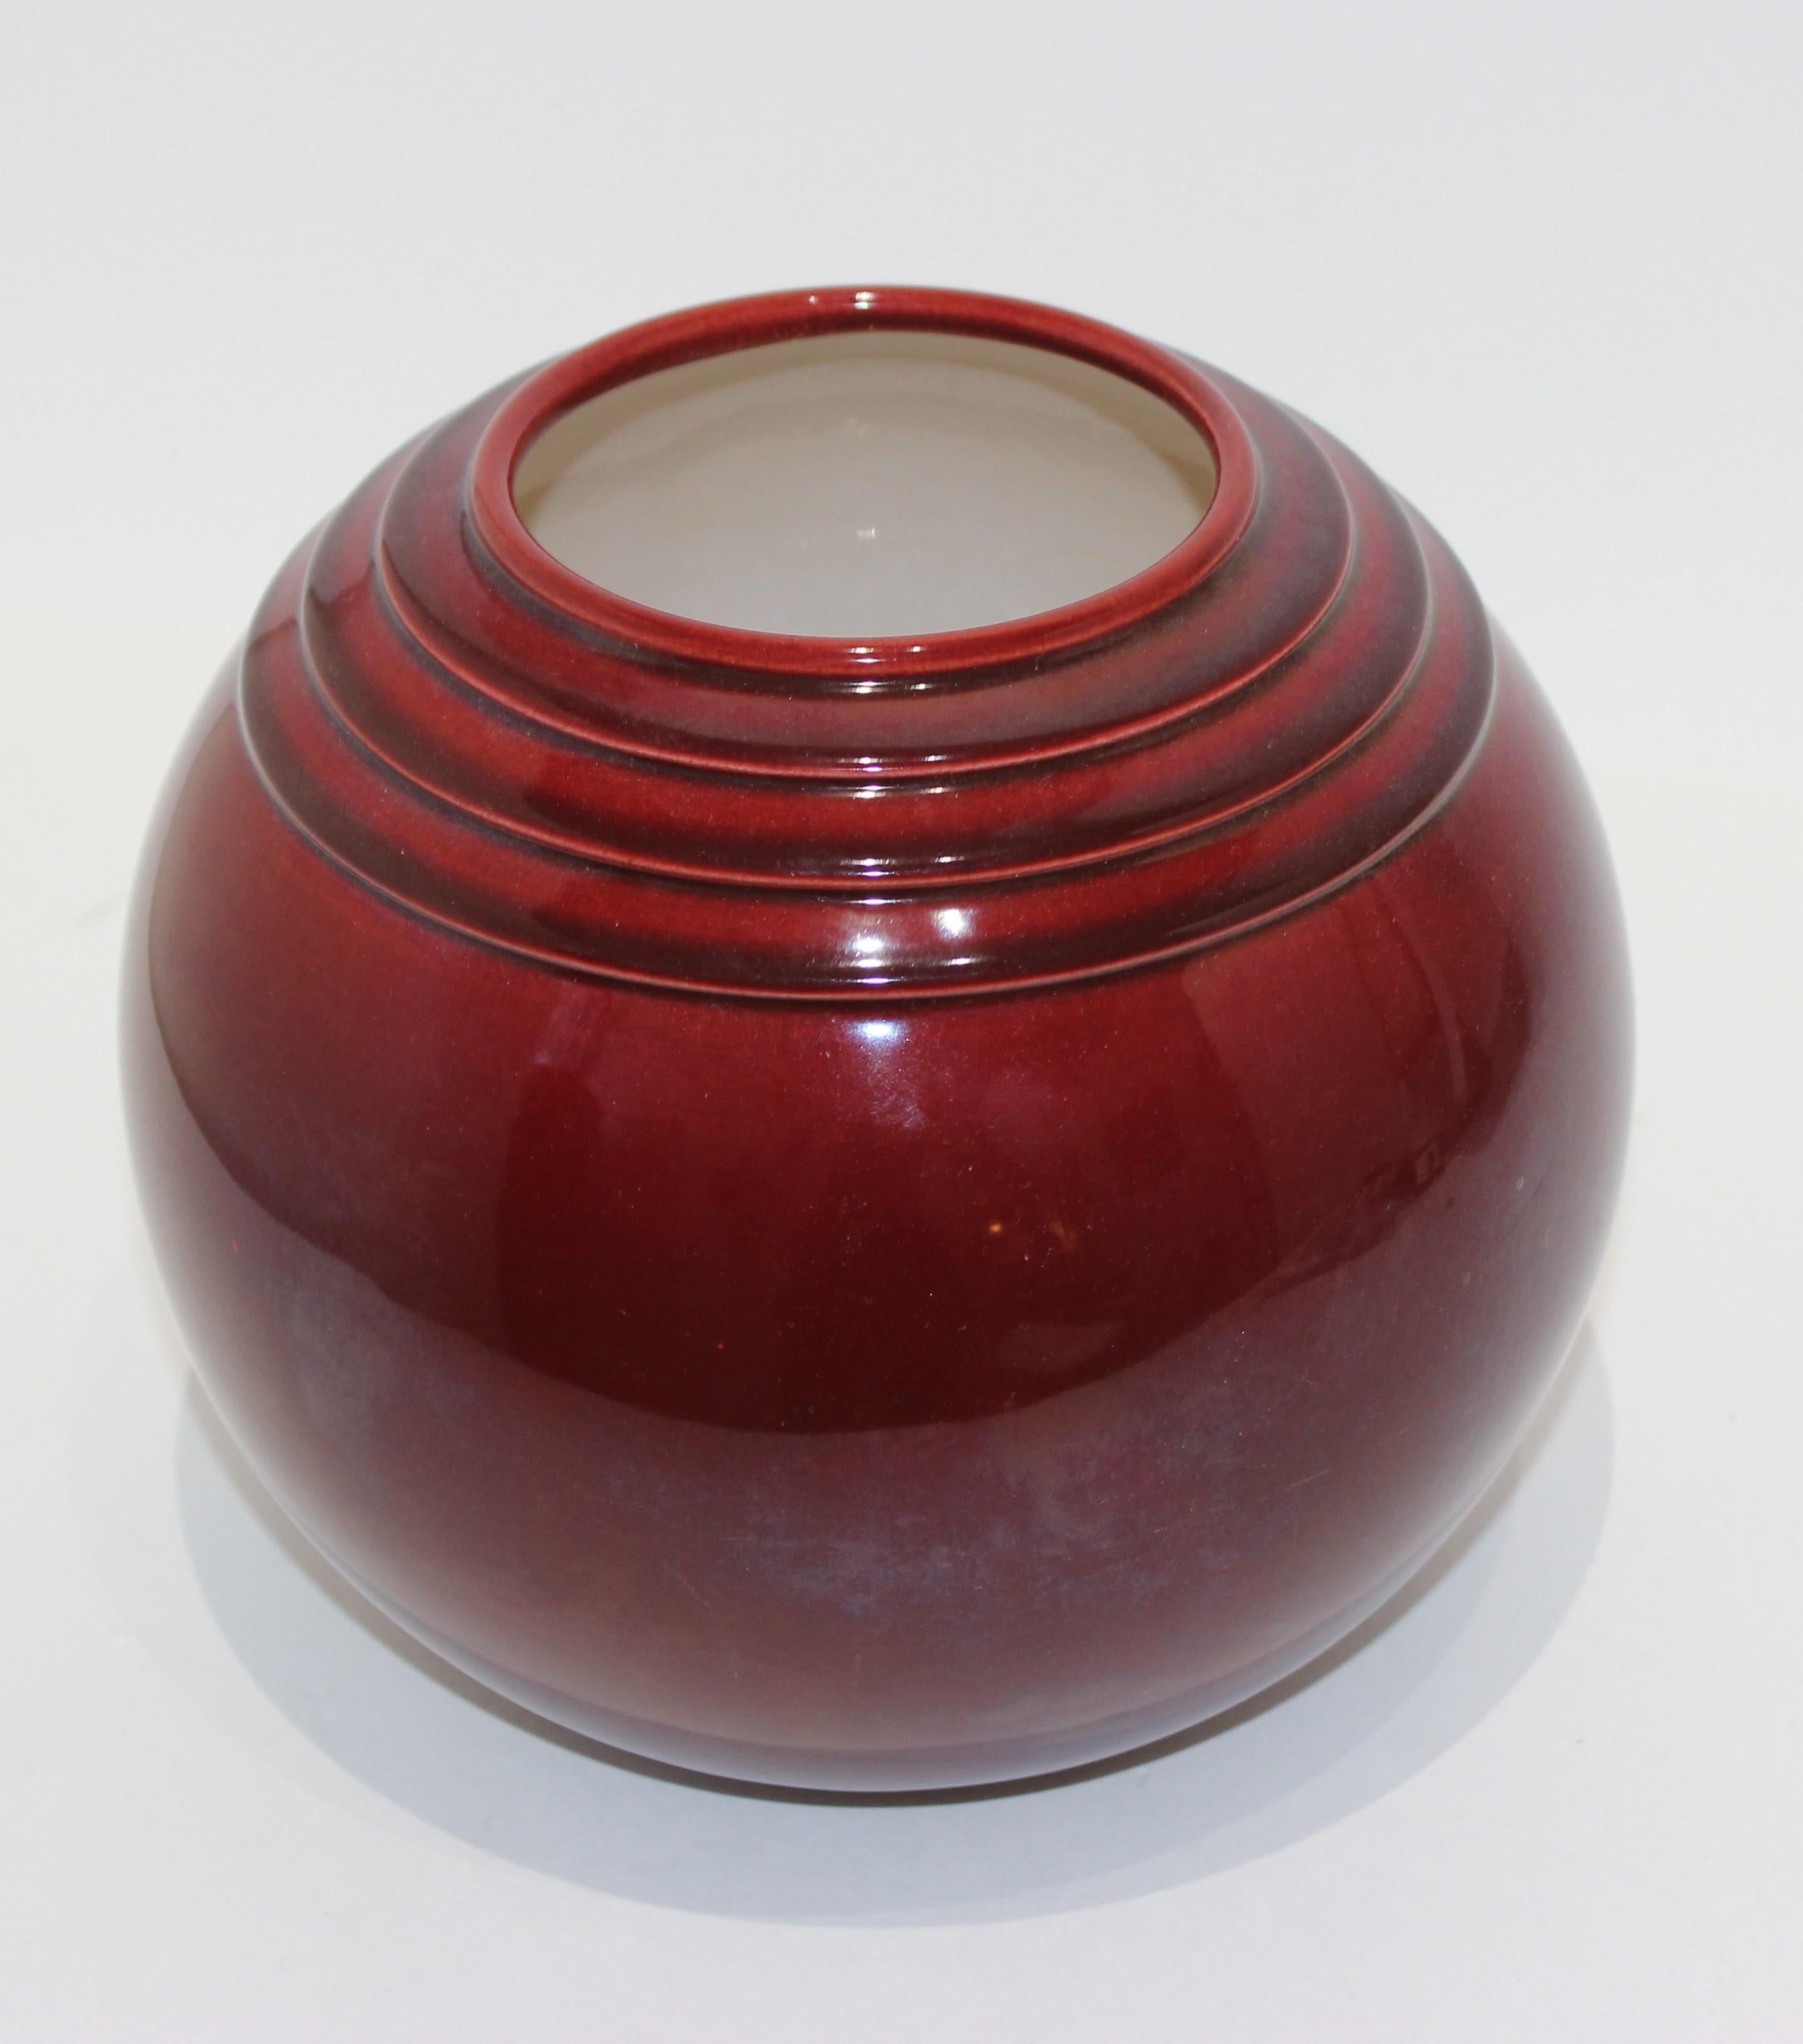 Burgundy color French Art Deco 1930s ceramic vase by PM-Sevres France.
Sold by Ovington's NY.